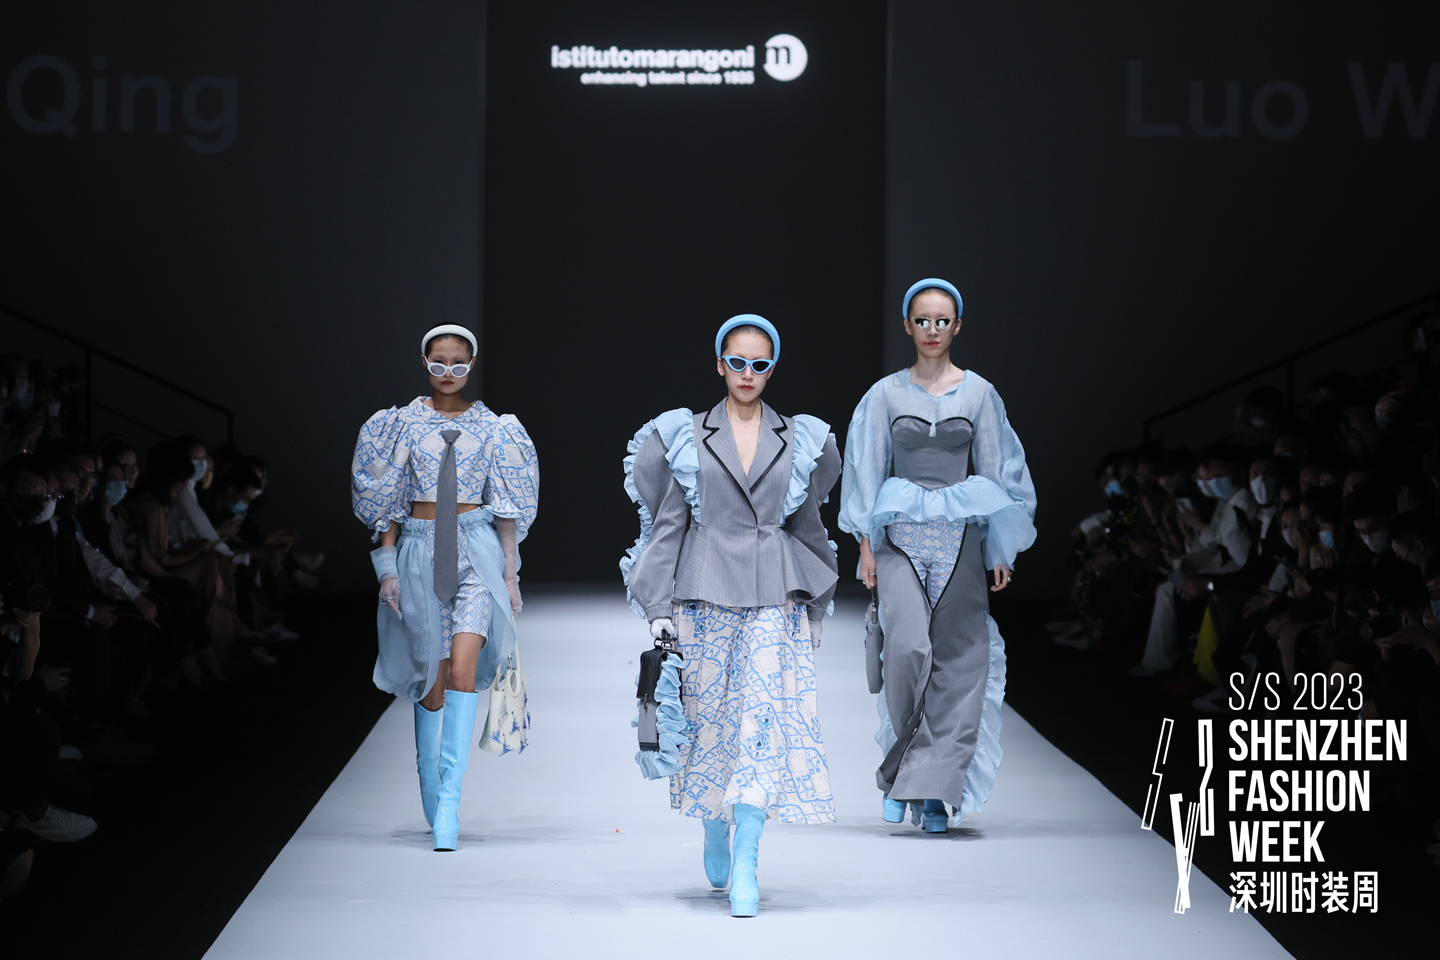 Look by Luo Wanqing, Fashion Design graduate at Istituto Marangoni Shenzhen 